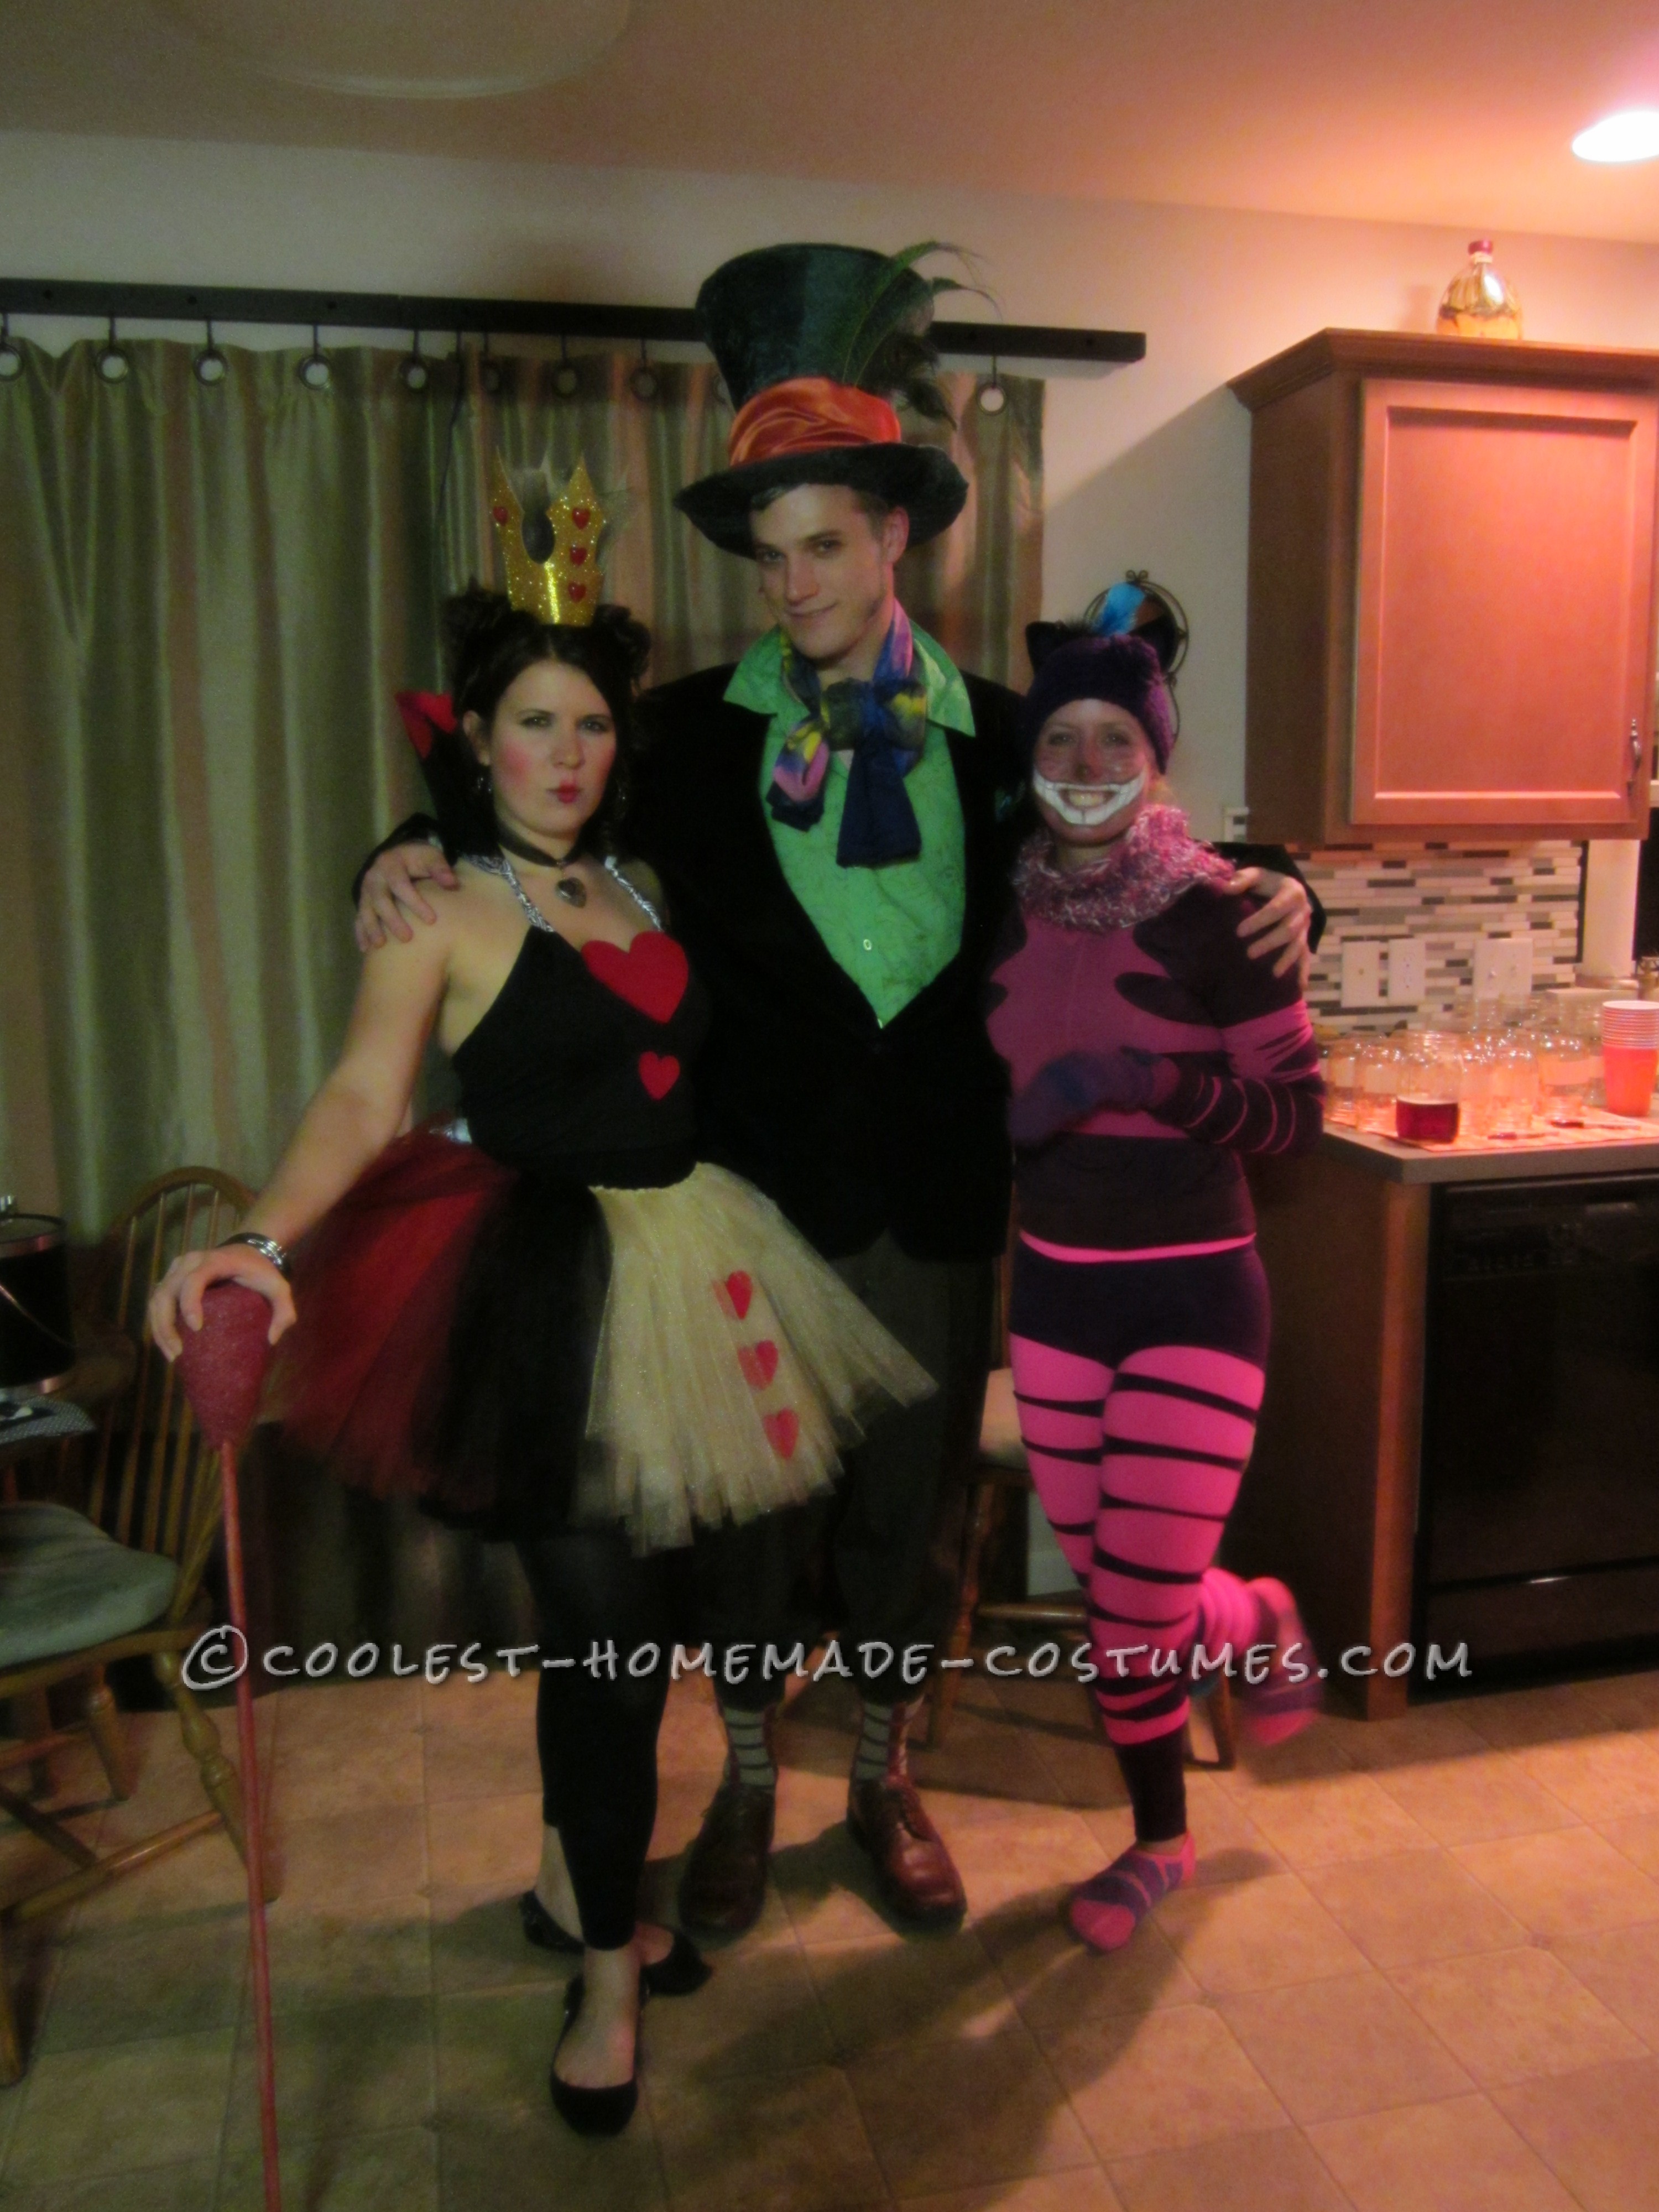 Awesome Homemade Adventure in Wonderland Group Costumes